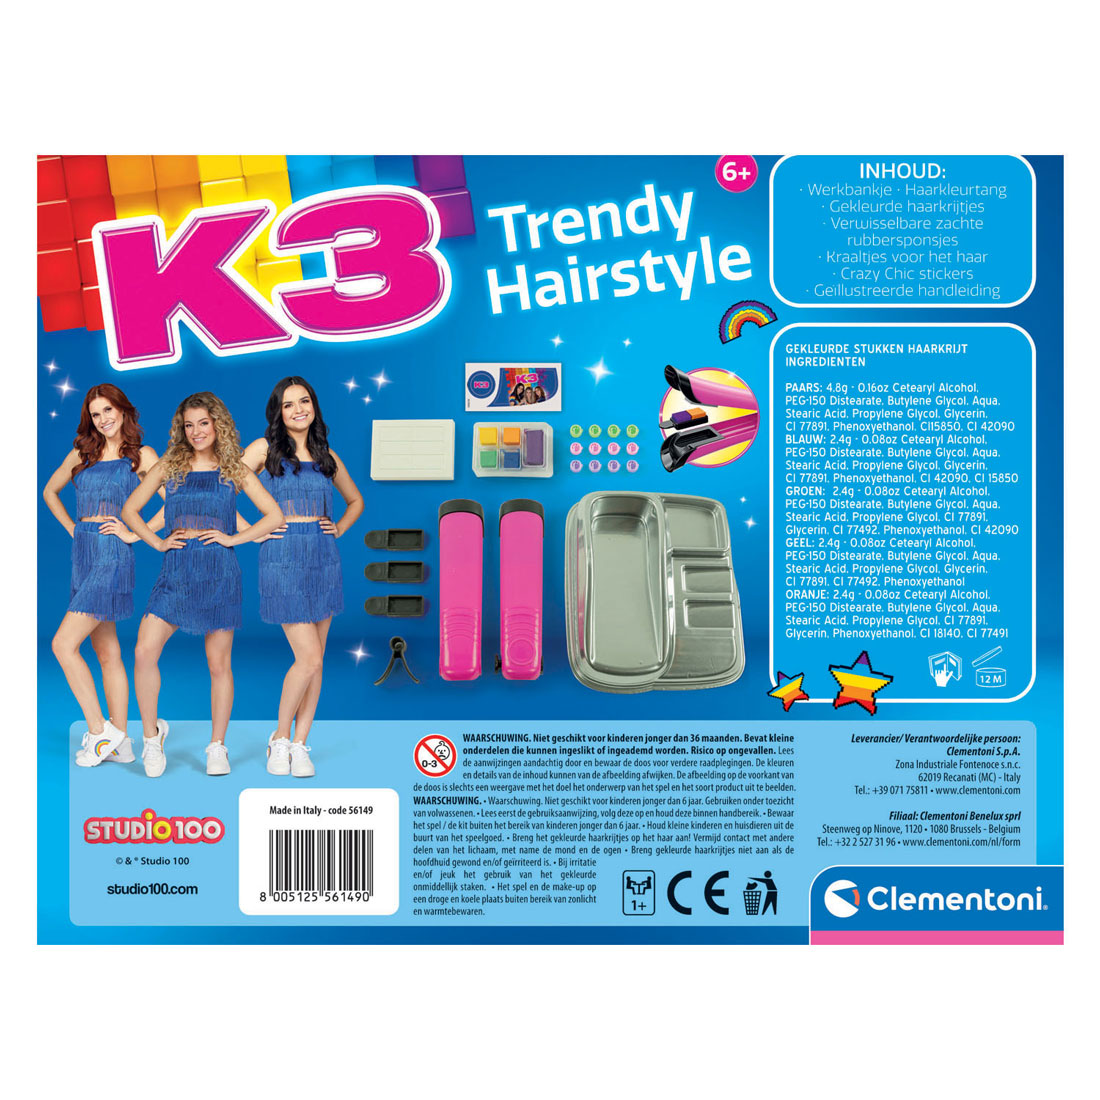 Clementoni Trendy Hairstyle K3 Coiffeur